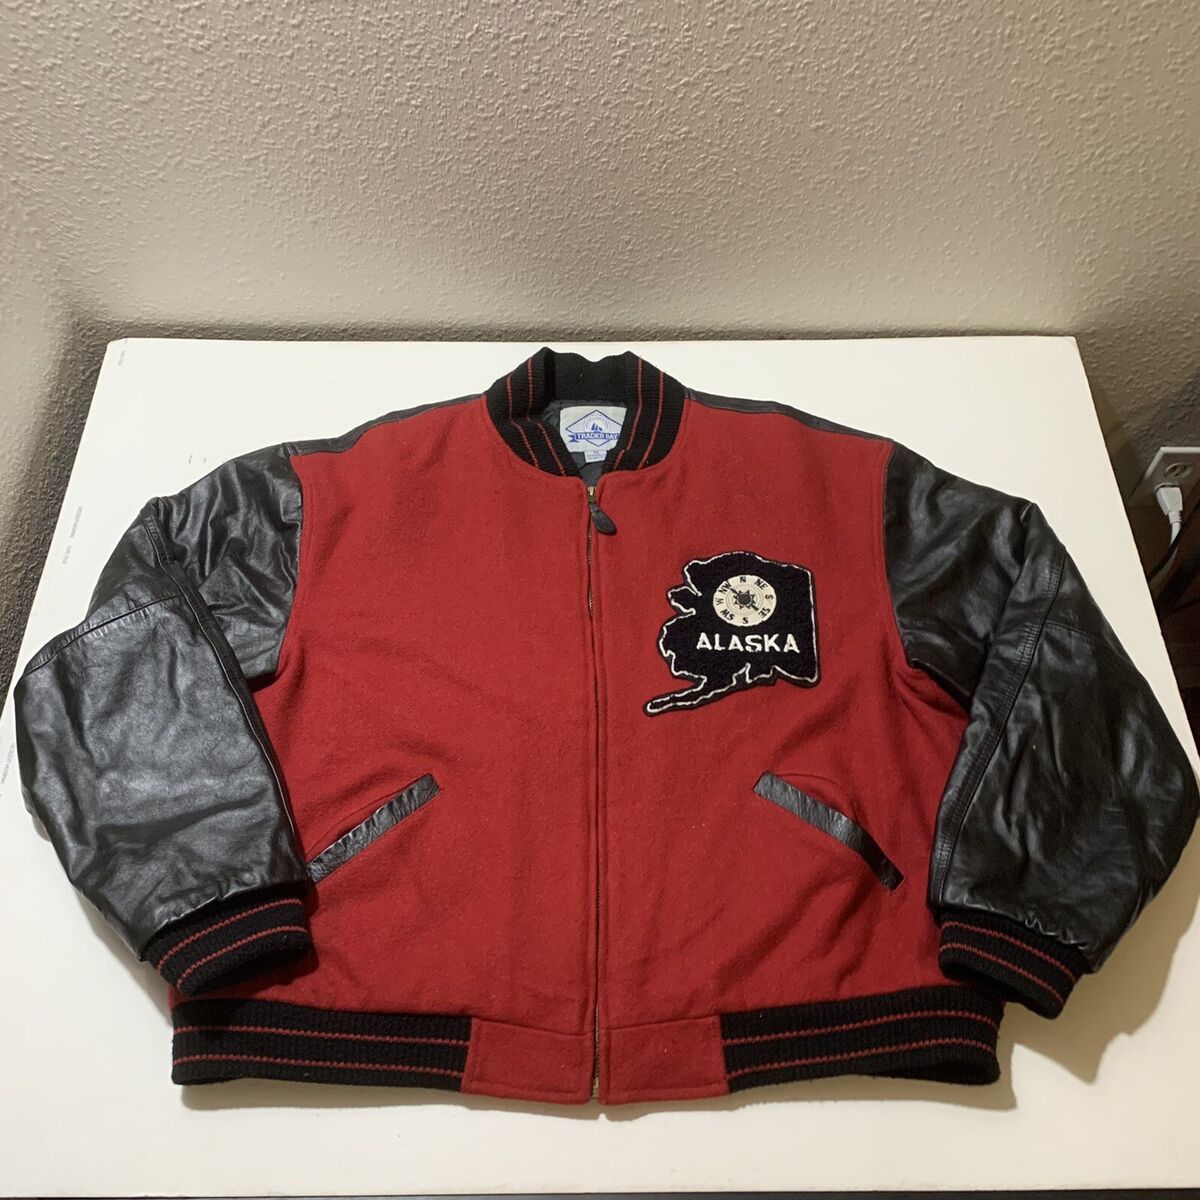 The finest letterman jacket and chenille patch manufacture on the internet.